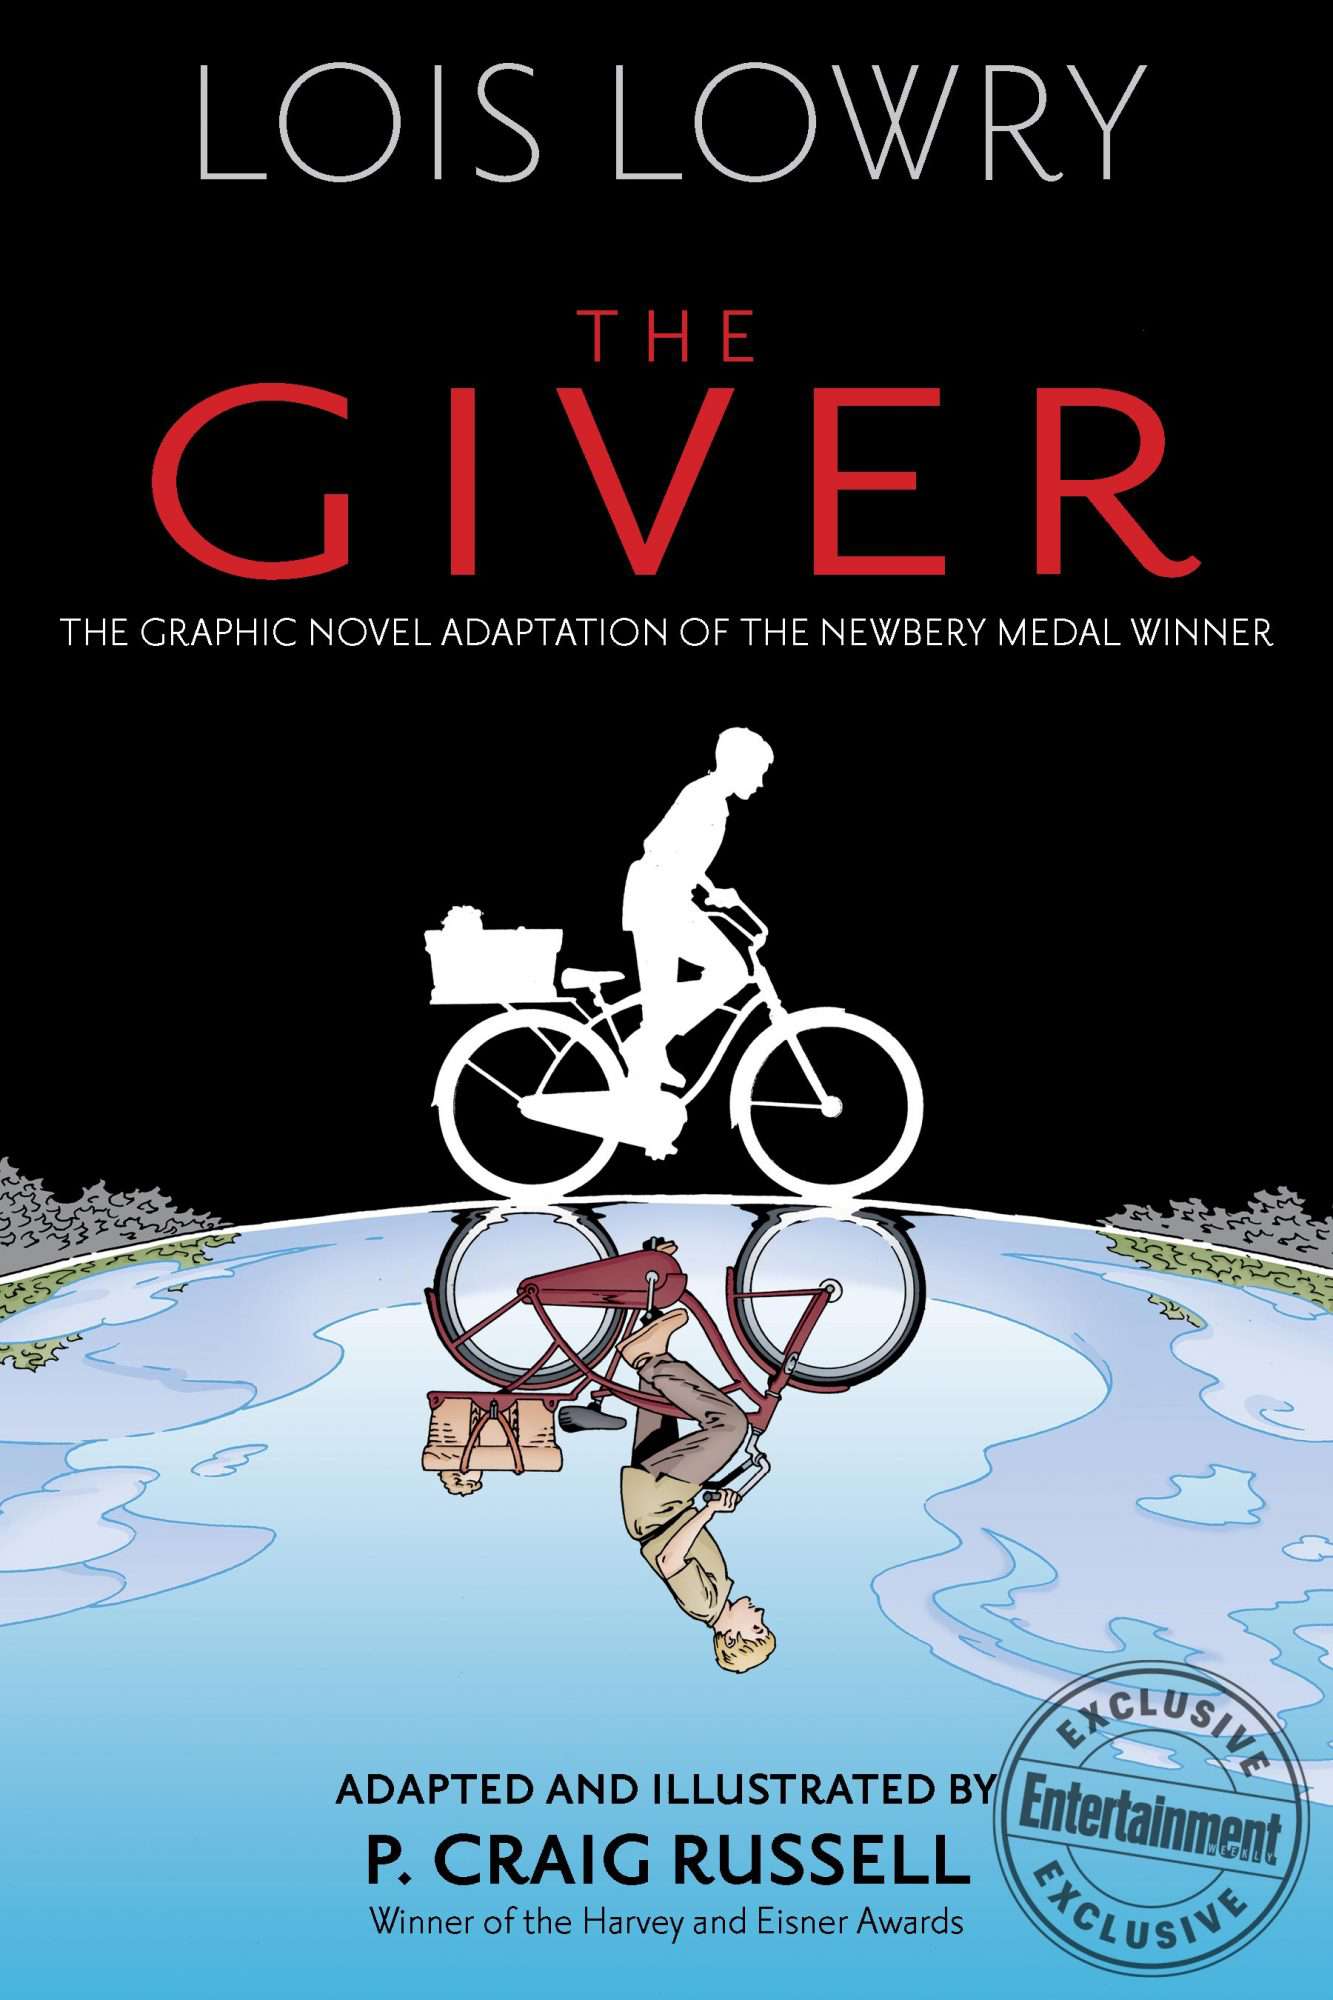 The Giver To Be Reimagined As A Stunning Graphic Novel By P. Craig Russell  | Ew.Com